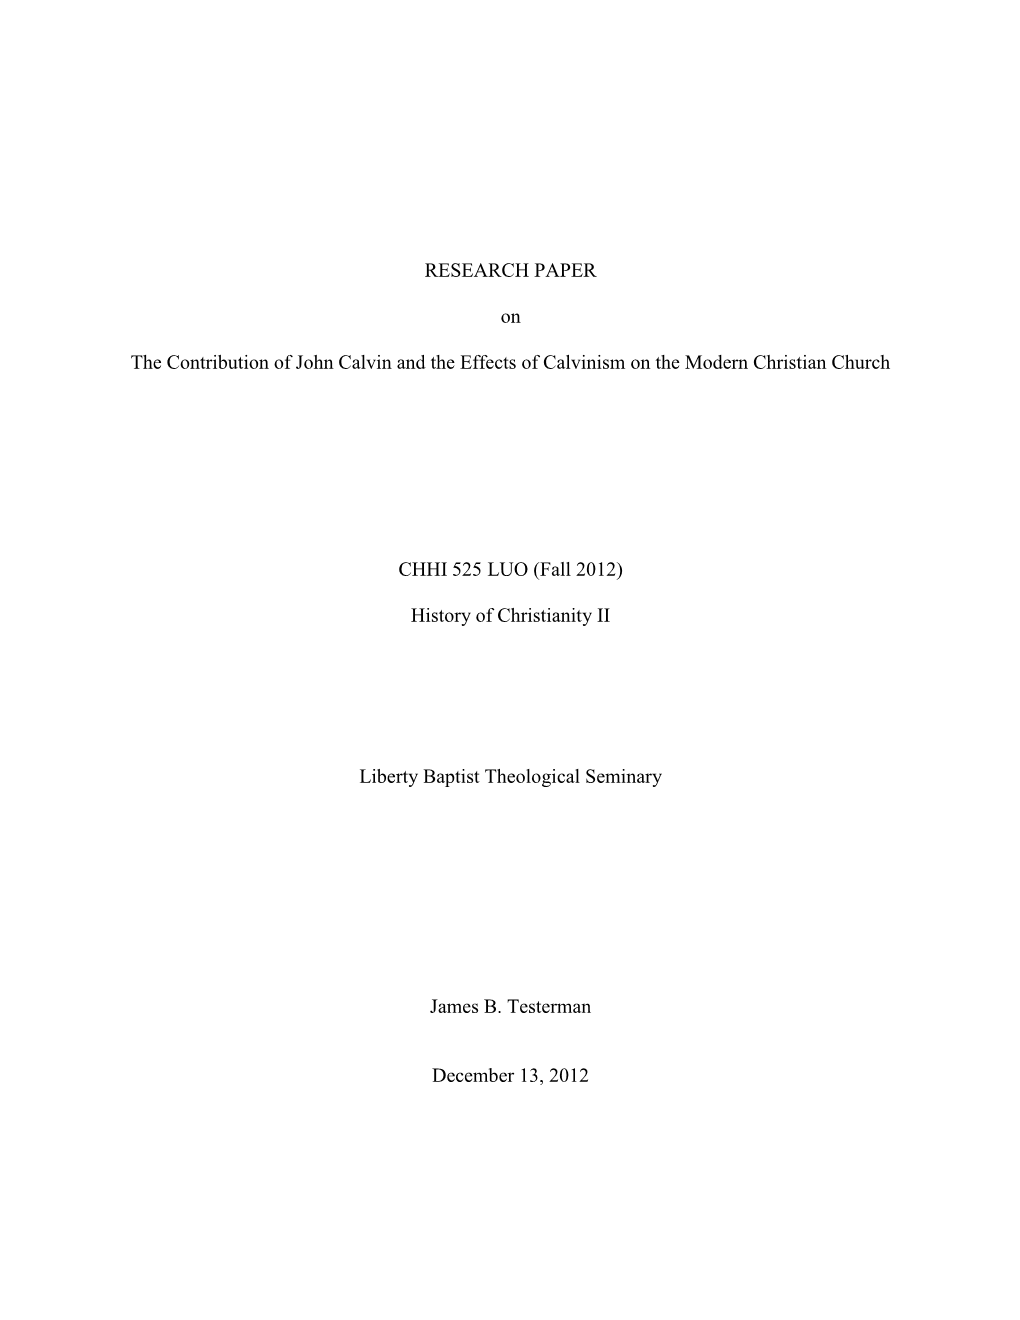 RESEARCH PAPER on the Contribution of John Calvin and the Effects of Calvinism on the Modern Christian Church CHHI 525 LUO (Fal